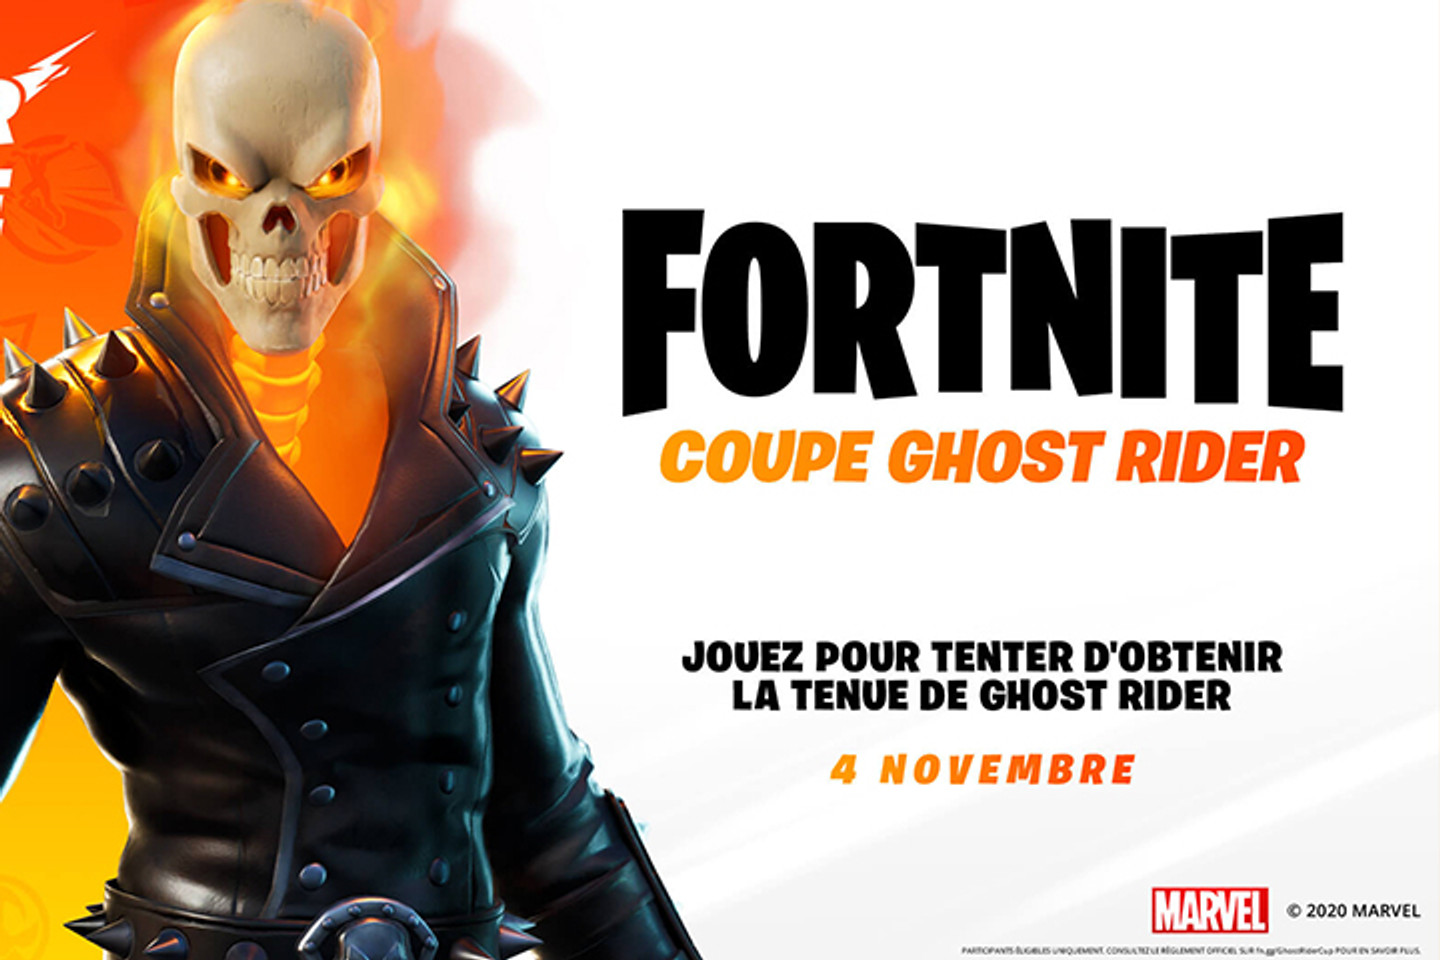 coupe-ghost-rider-fortnite